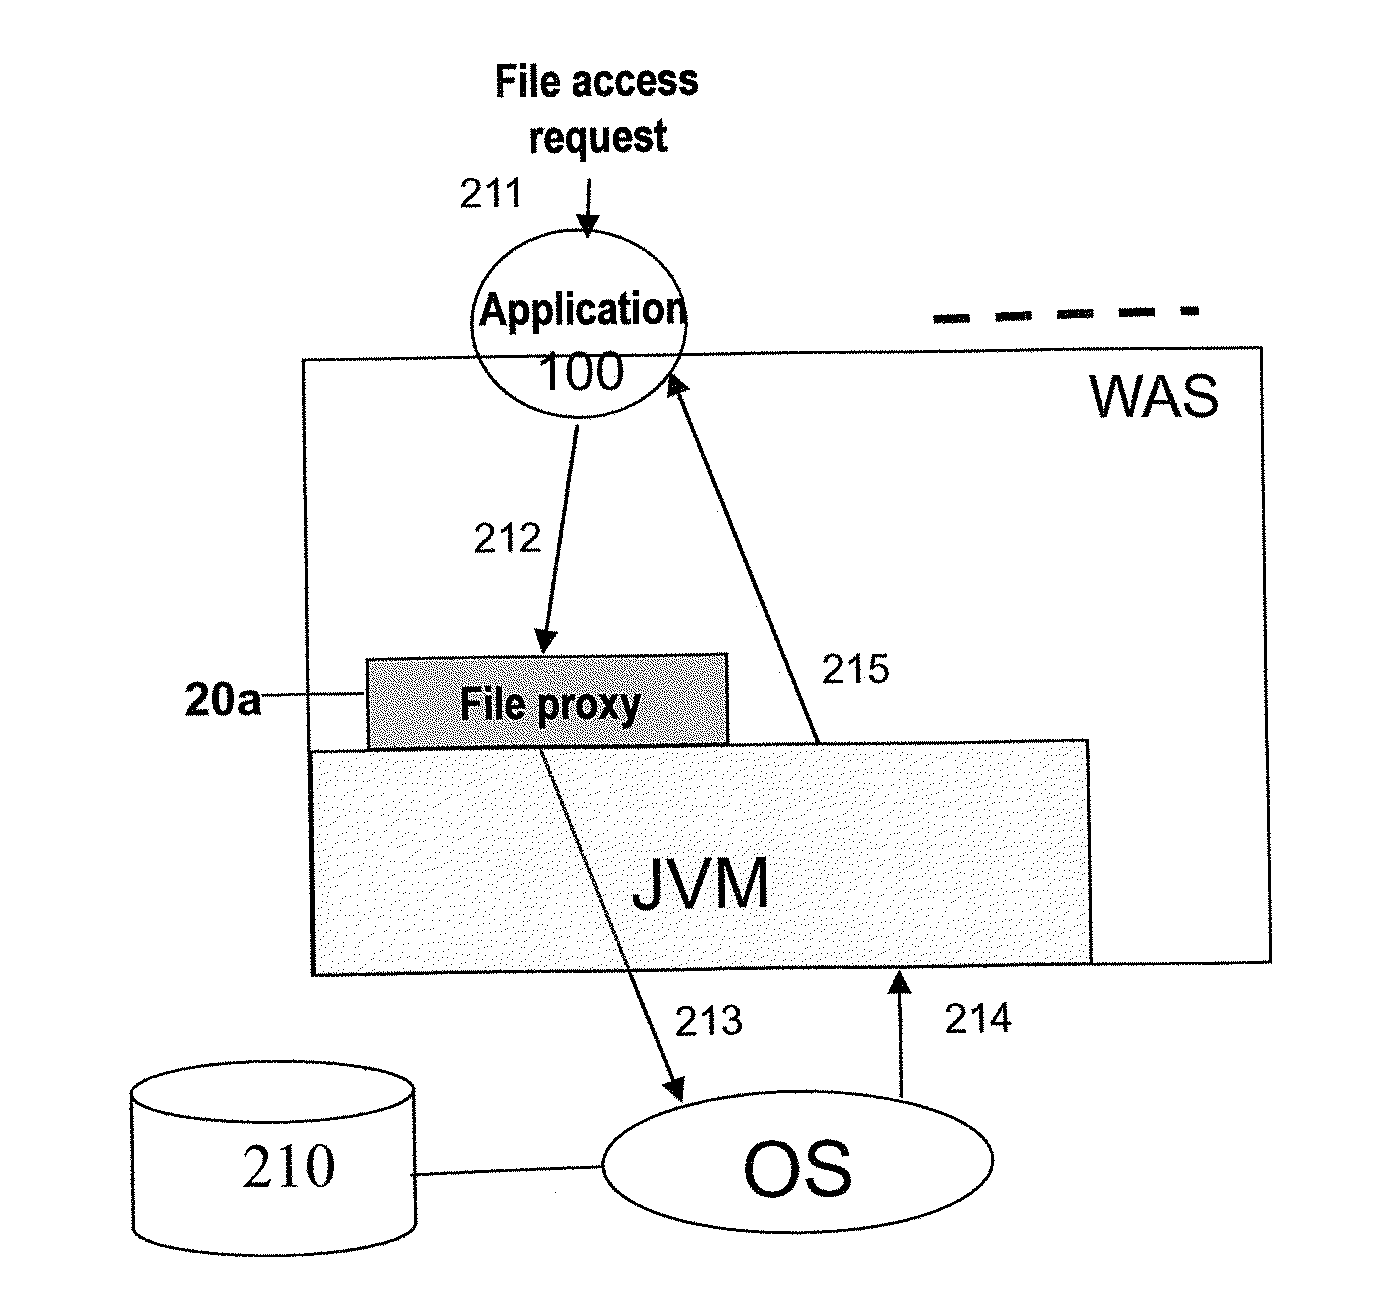 Mechanism and apparatus for transparently enables multi-tenant file access operation